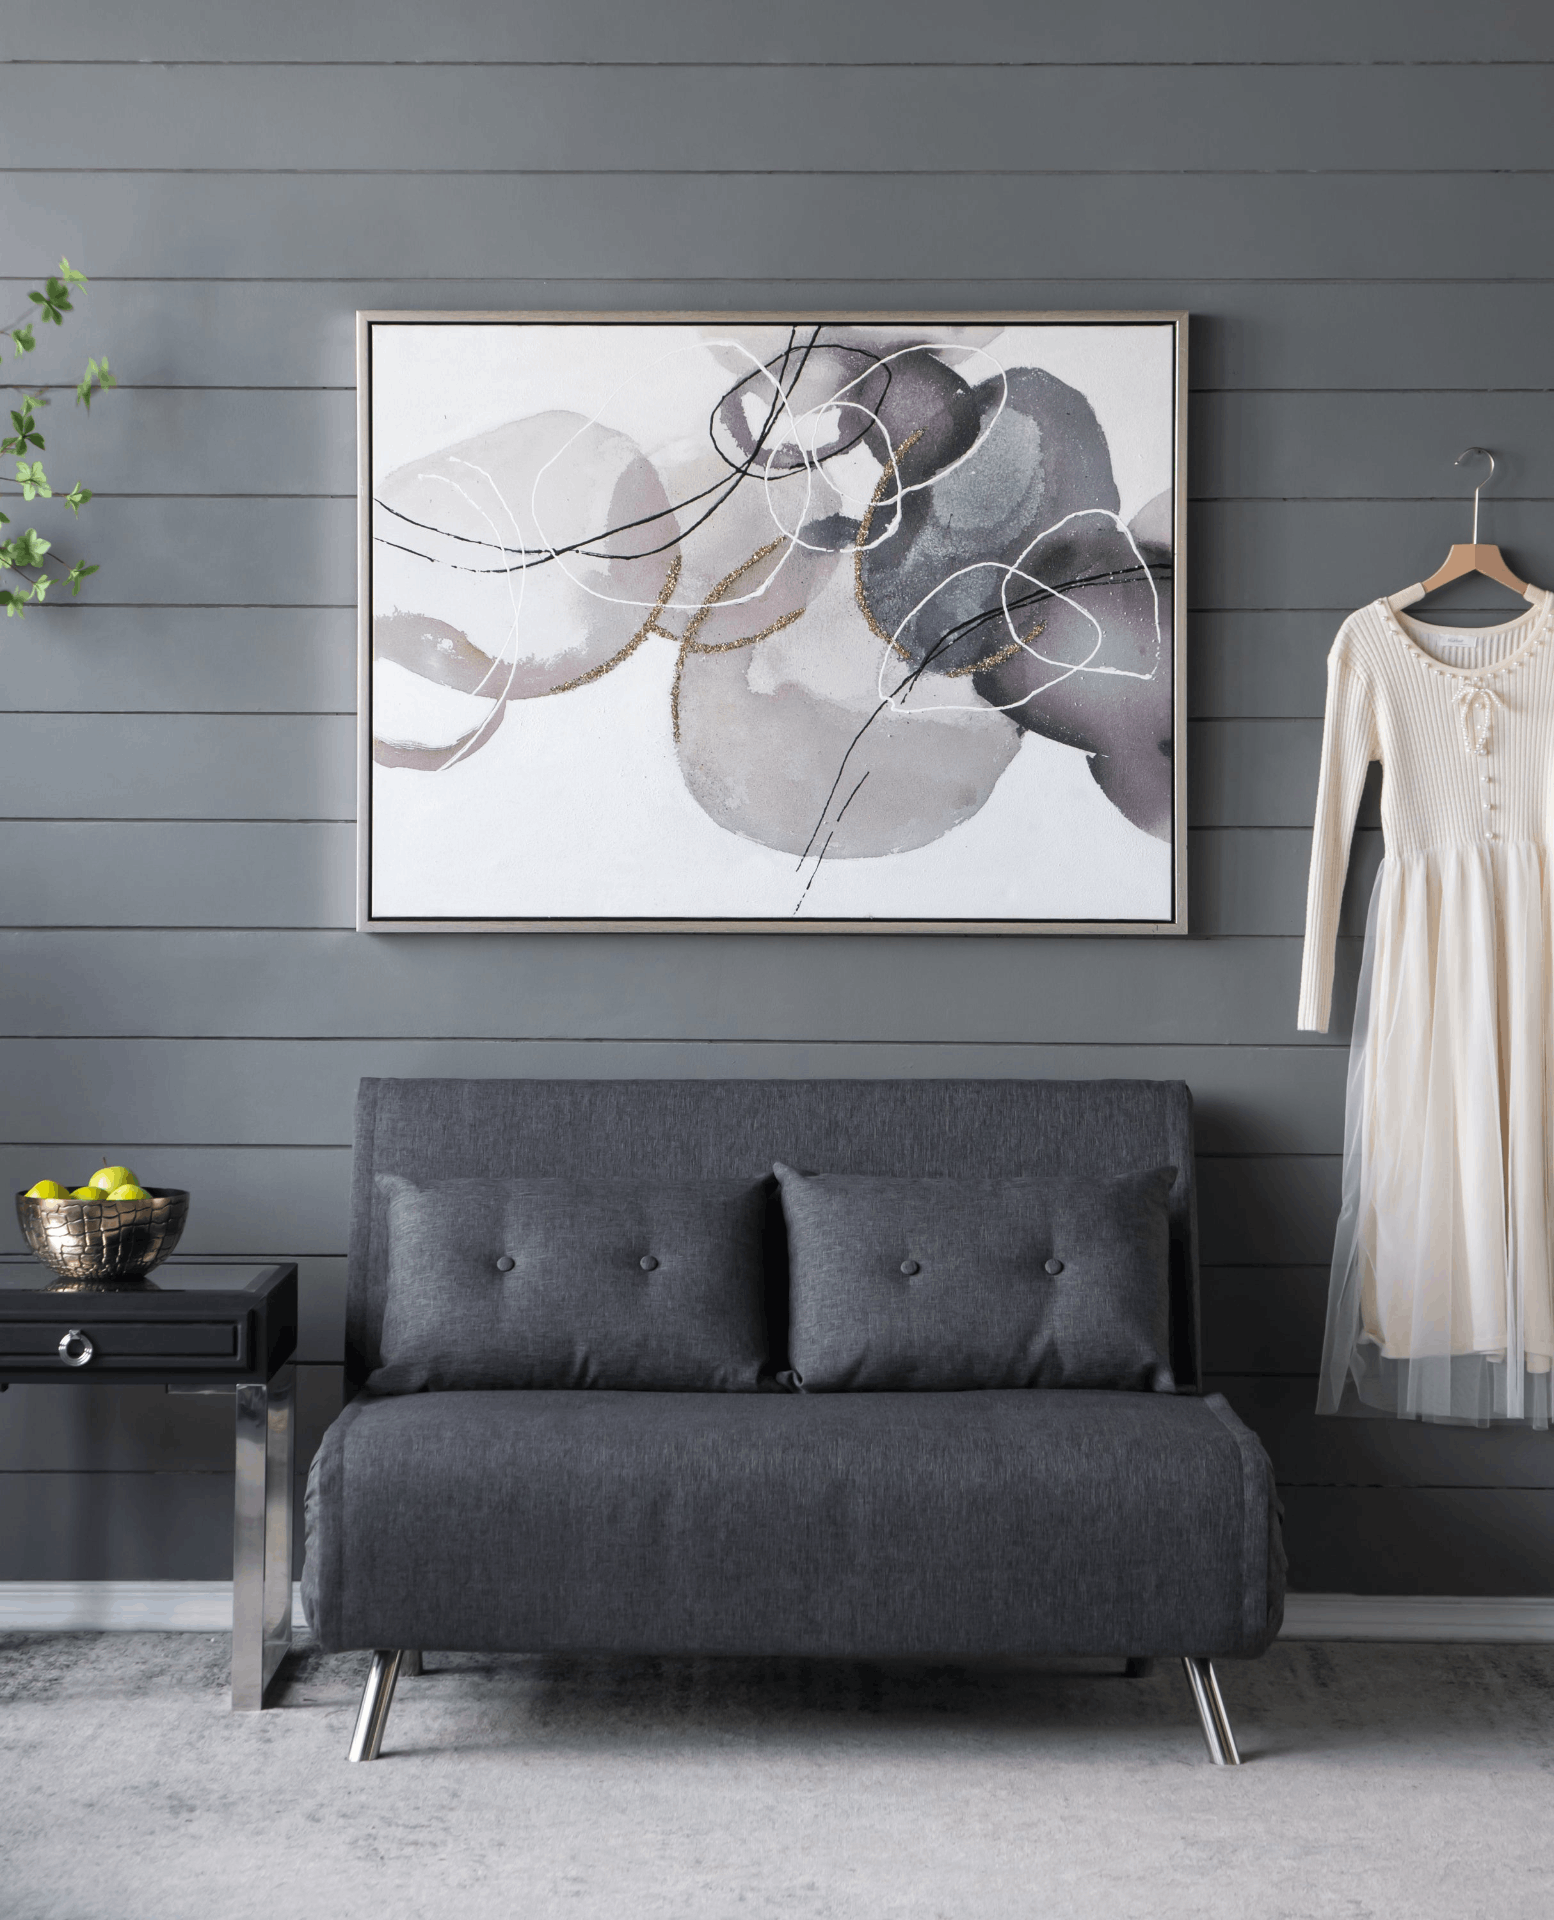 47" x 35.5" Large Modern Oil Painting, Hand Painted Abstract Gray Brown Watercolor Texture 